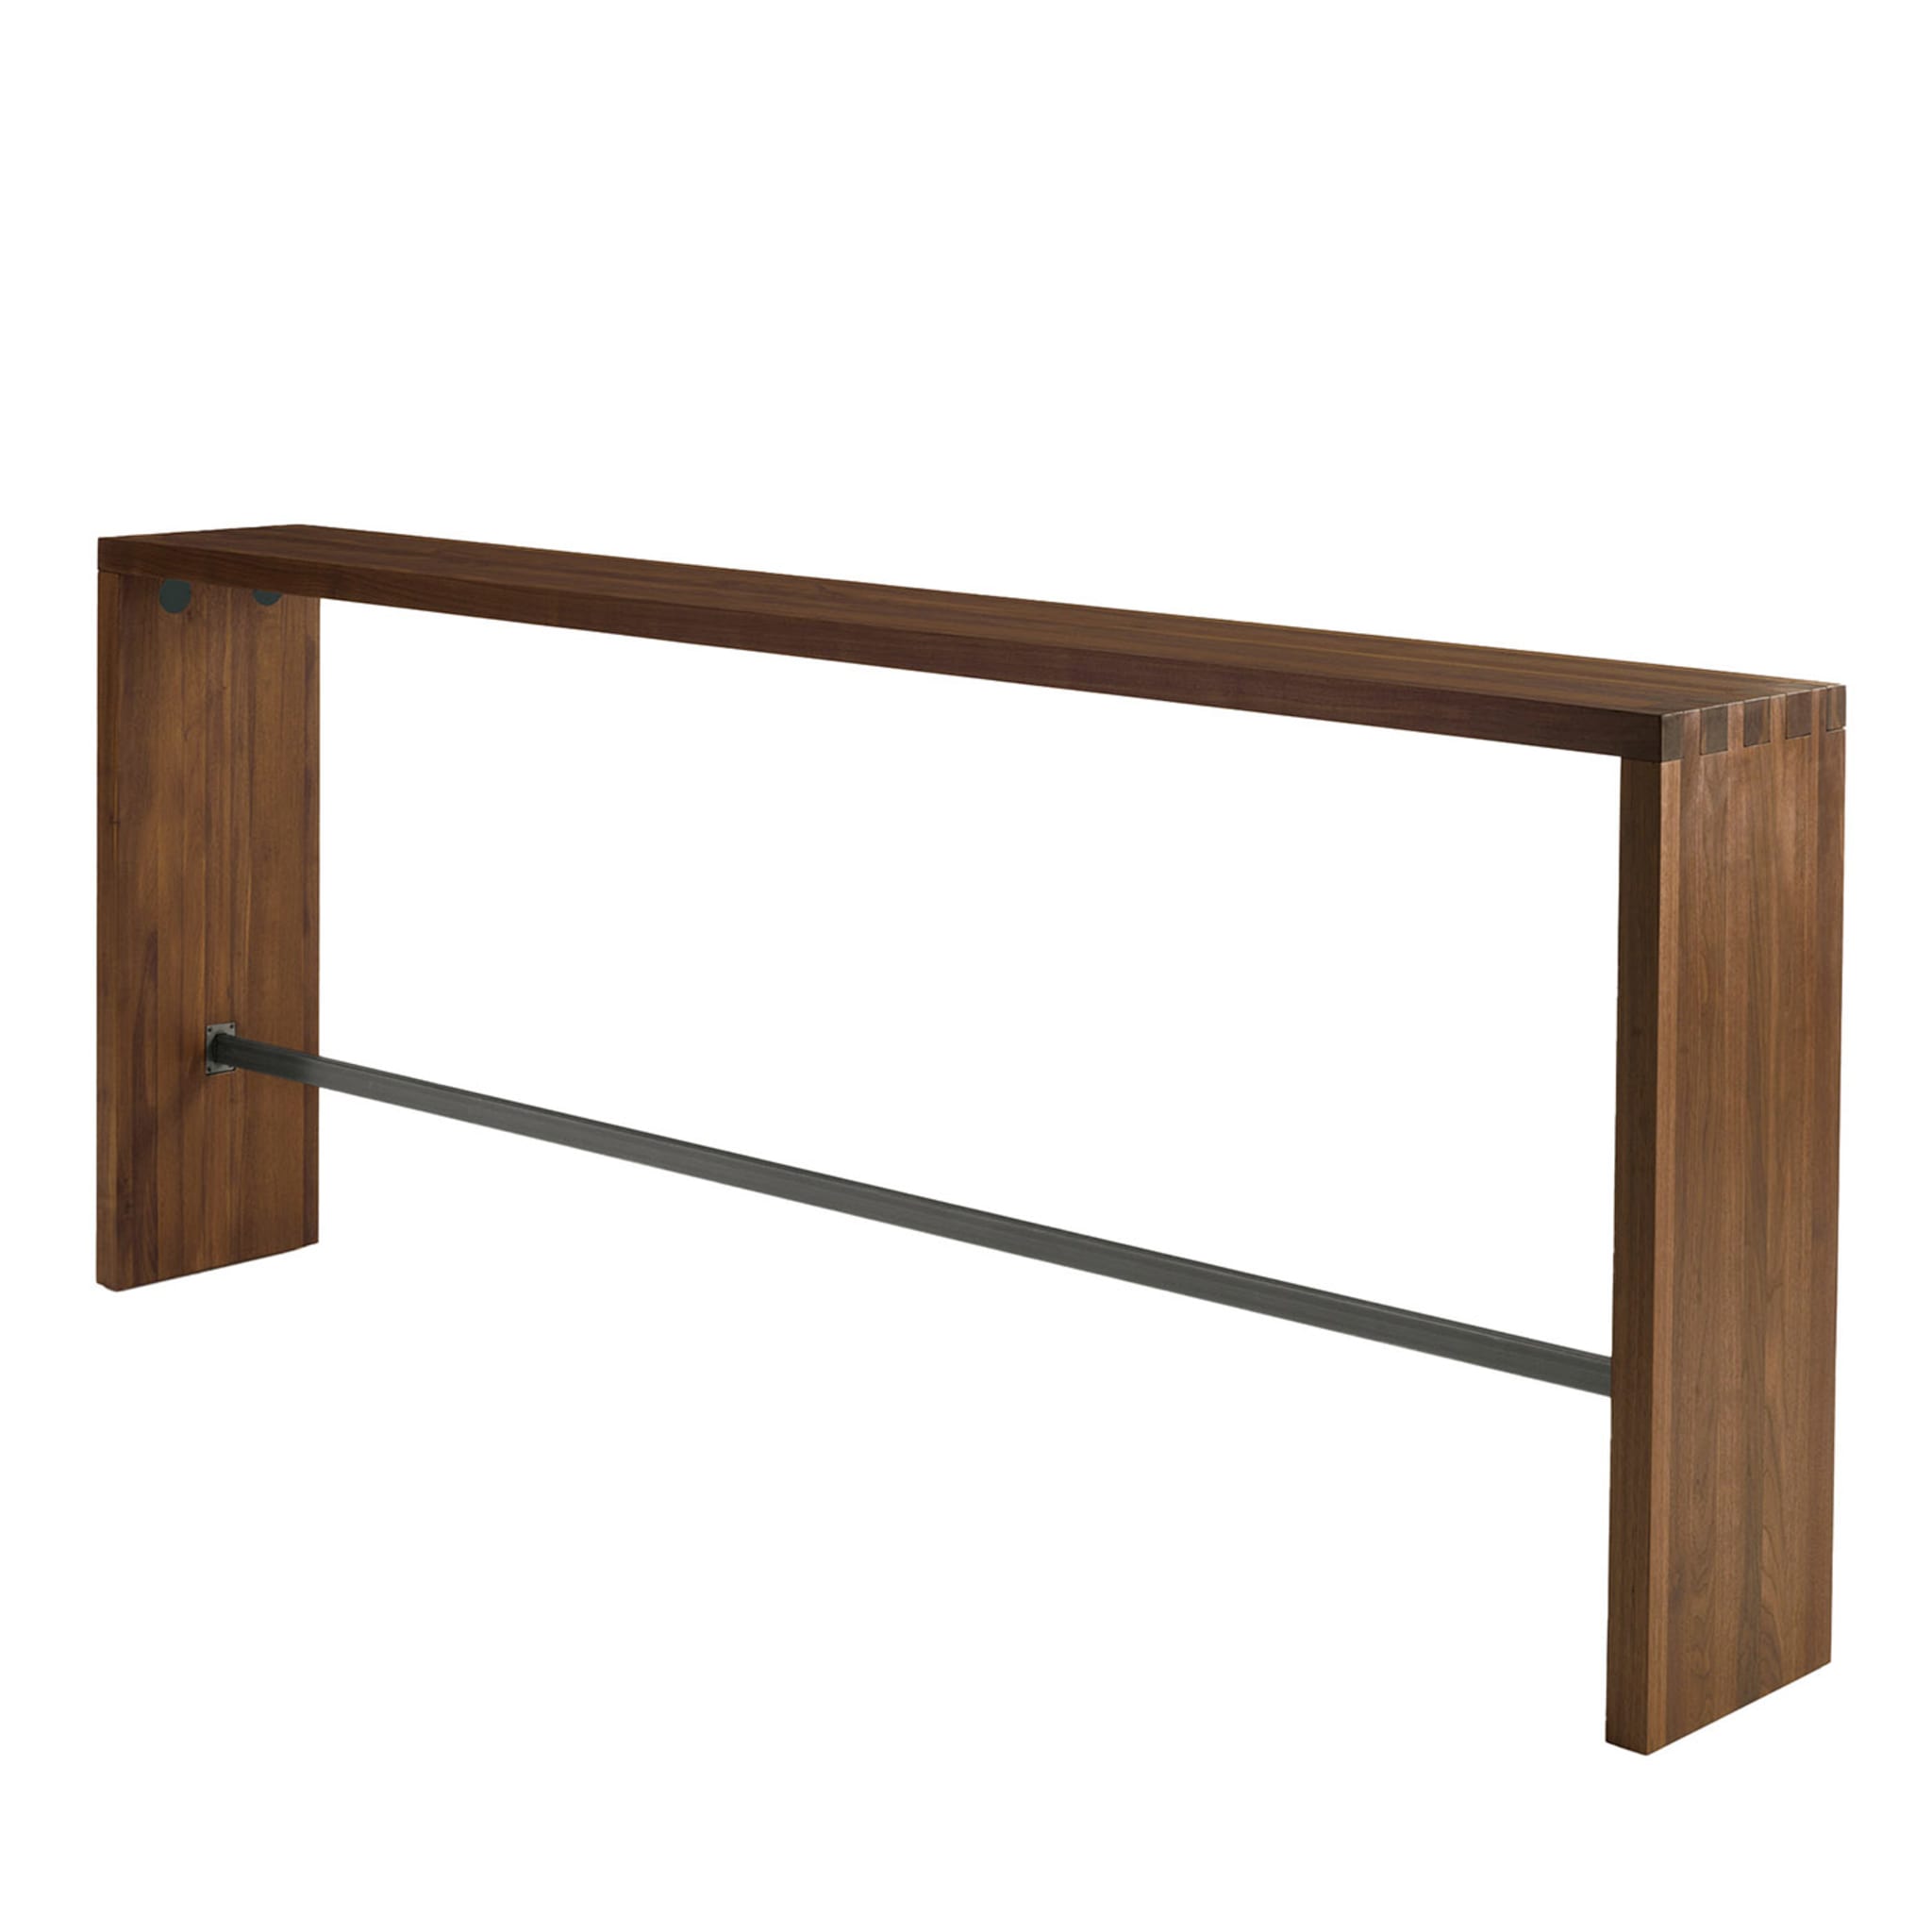 Frame Bar Walnut Console by C.R. & S. Riva 1920 - Main view